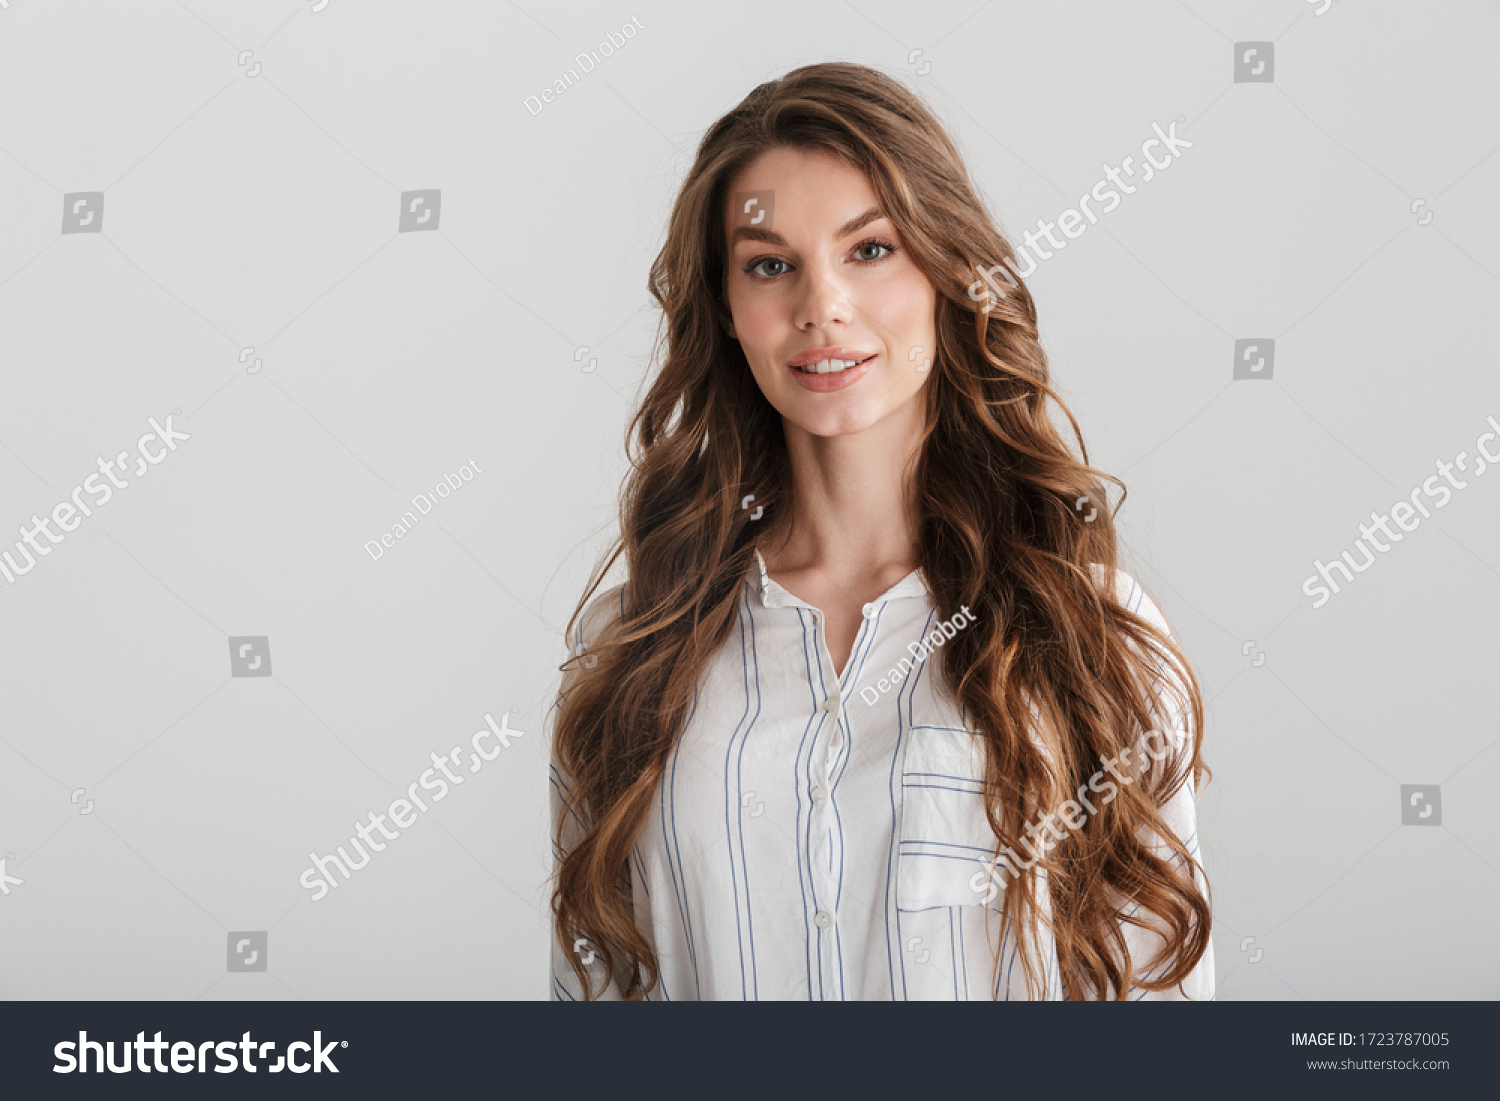 Image of confident caucasian woman posing and looking at camera isolated over white background #1723787005